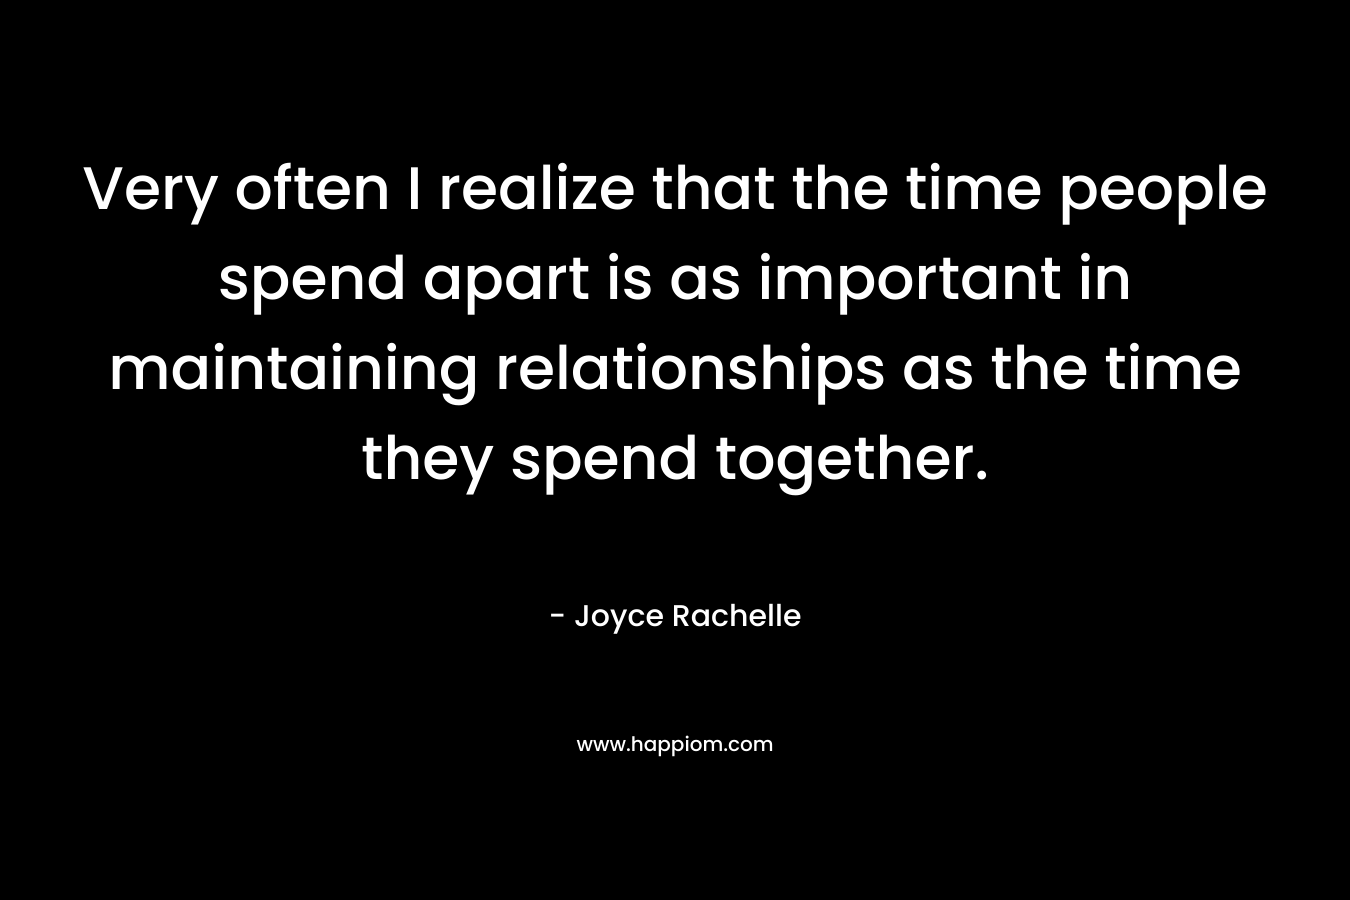 Very often I realize that the time people spend apart is as important in maintaining relationships as the time they spend together. – Joyce Rachelle